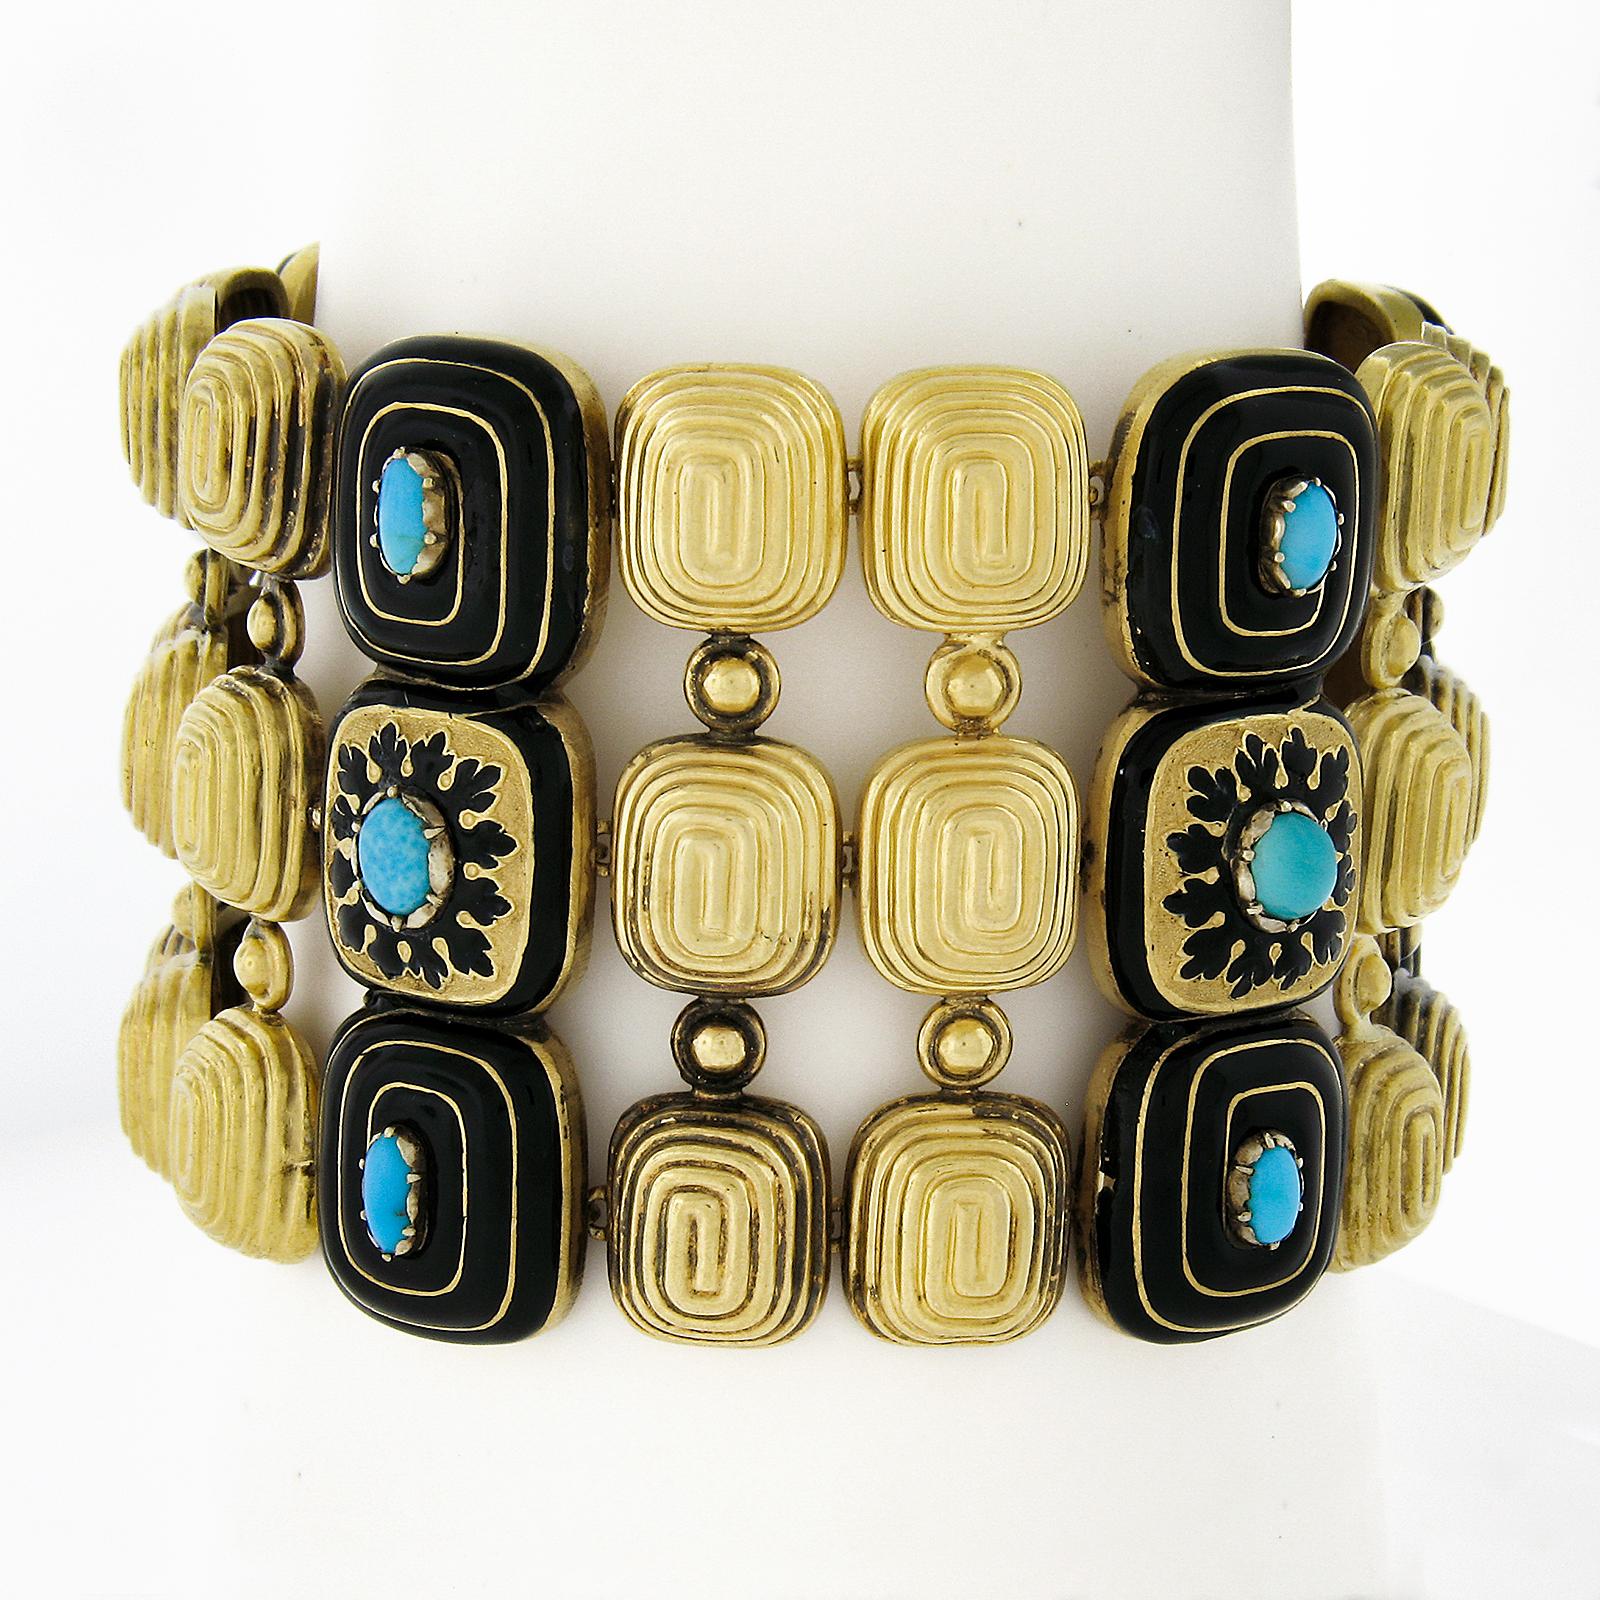 --Stone(s):--
(15) Natural Genuine Turquoise - Oval Cabochon Cut - Bezel Set - Blue w/ Natural Variation in Color

Material: Solid 18k Yellow Gold
Weight: 68.14 Grams
Type: Wide 3 Row Strap Bracelet
Length: Comfortably Fits Up to a 7.5 Inch Wrist